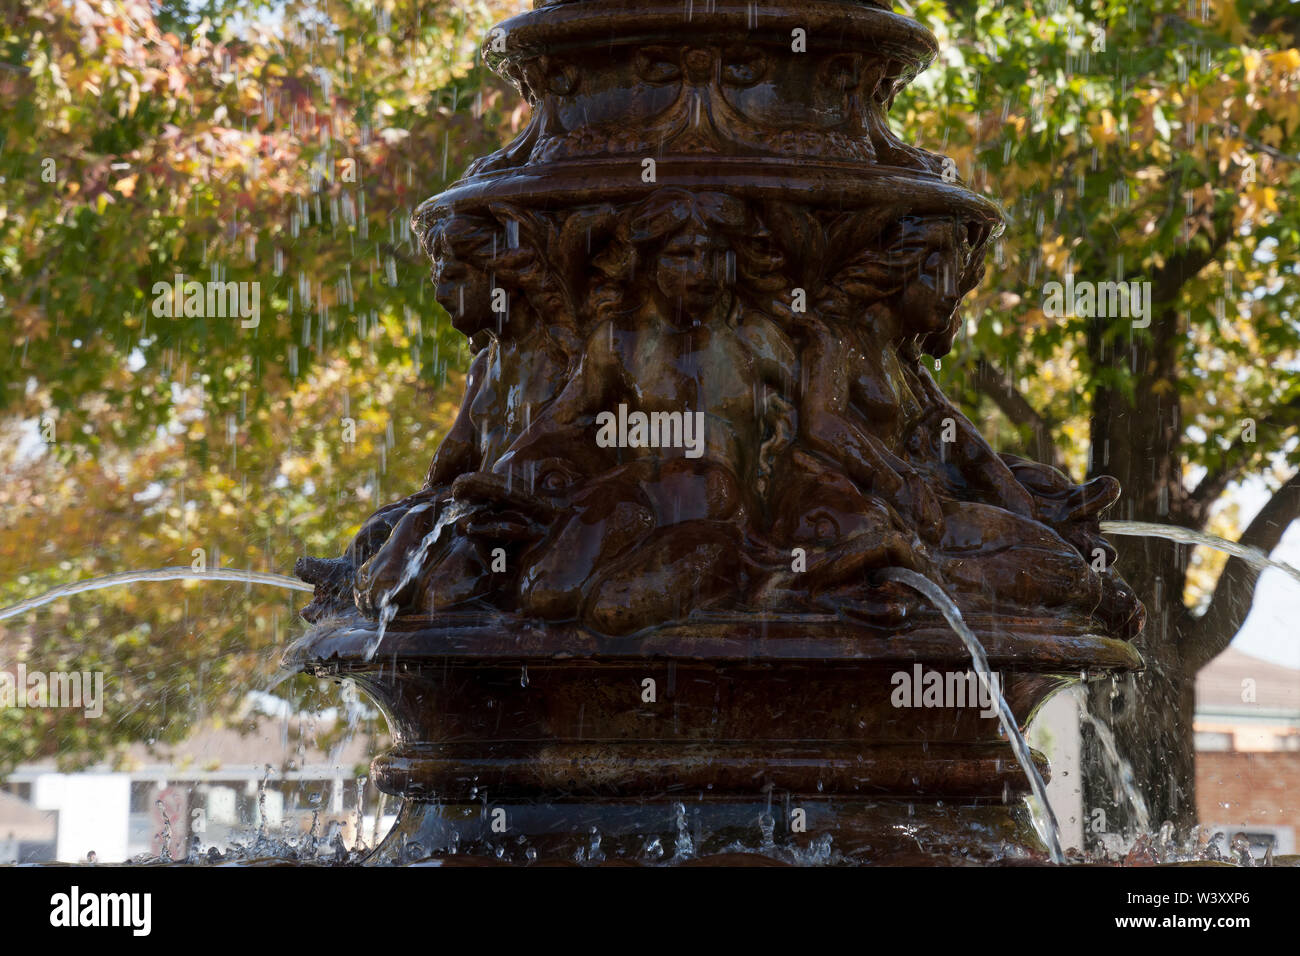 Narrandera Australia, Hankinson Fountain manufactured by the Royal Doulton company, the ceramic fountain is one of only two known to be in existence, Stock Photo